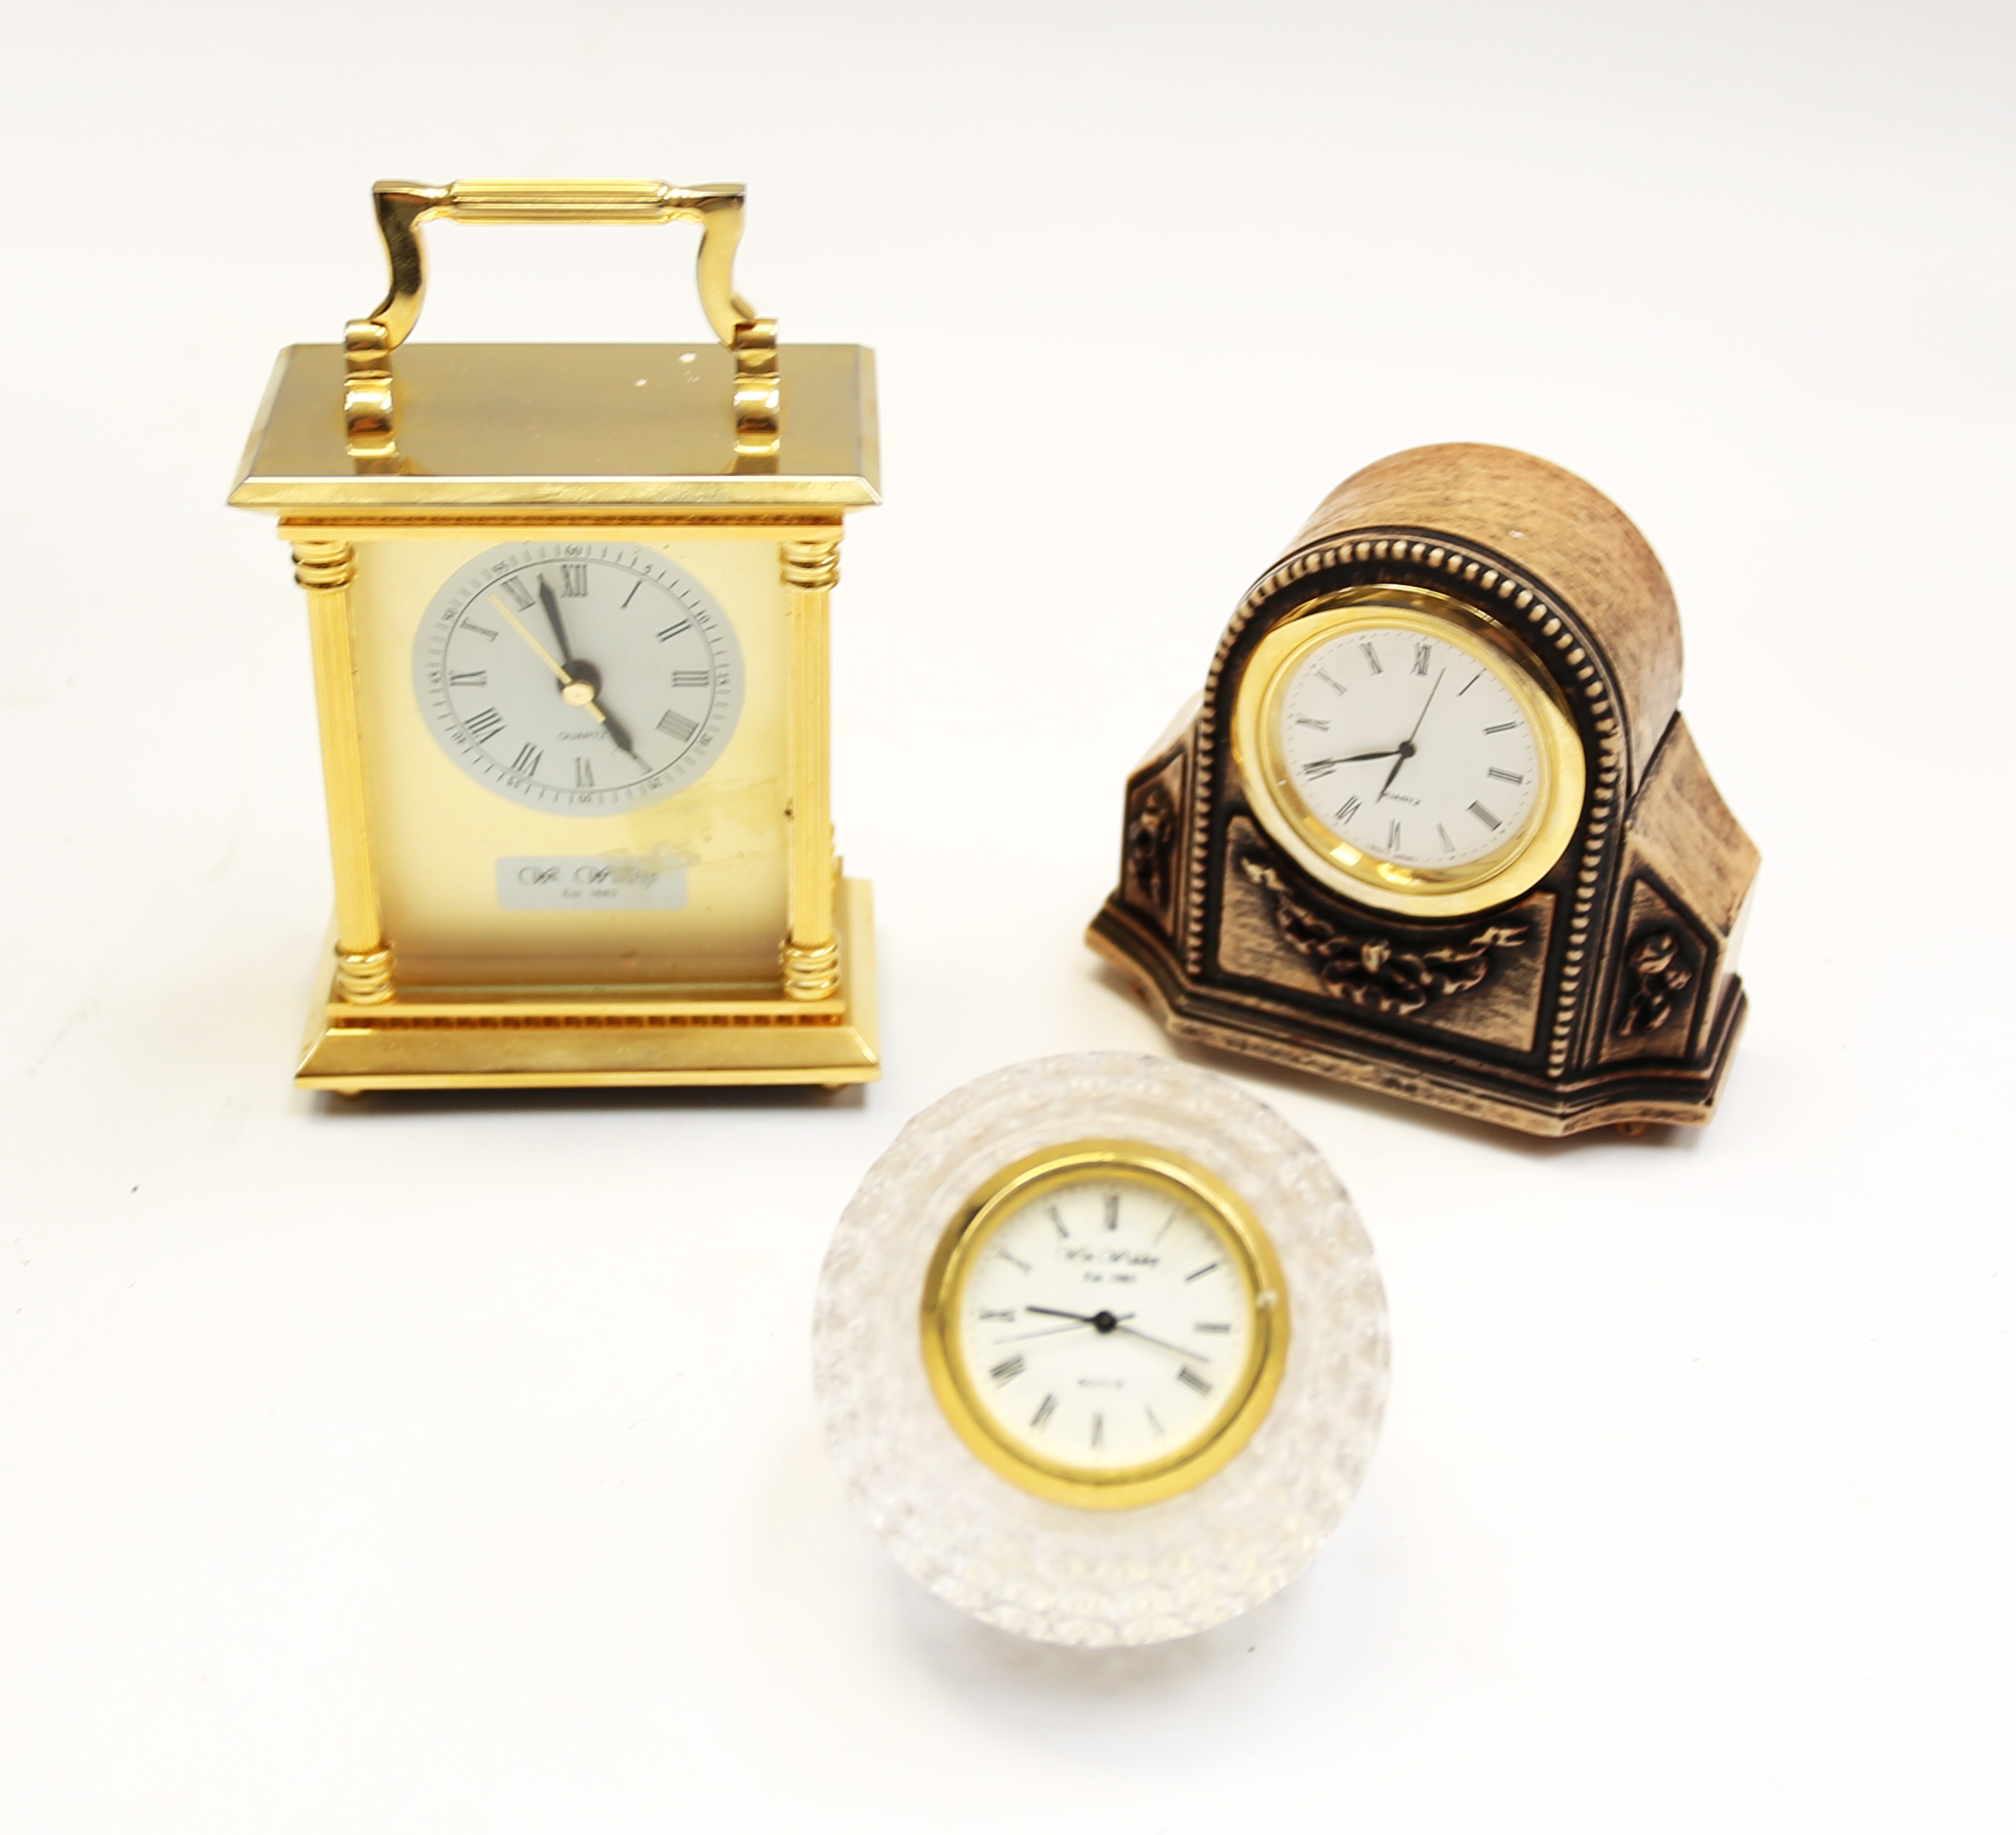 A 1930s 8 day wall clock along with three small mantle clocks. - Image 2 of 4